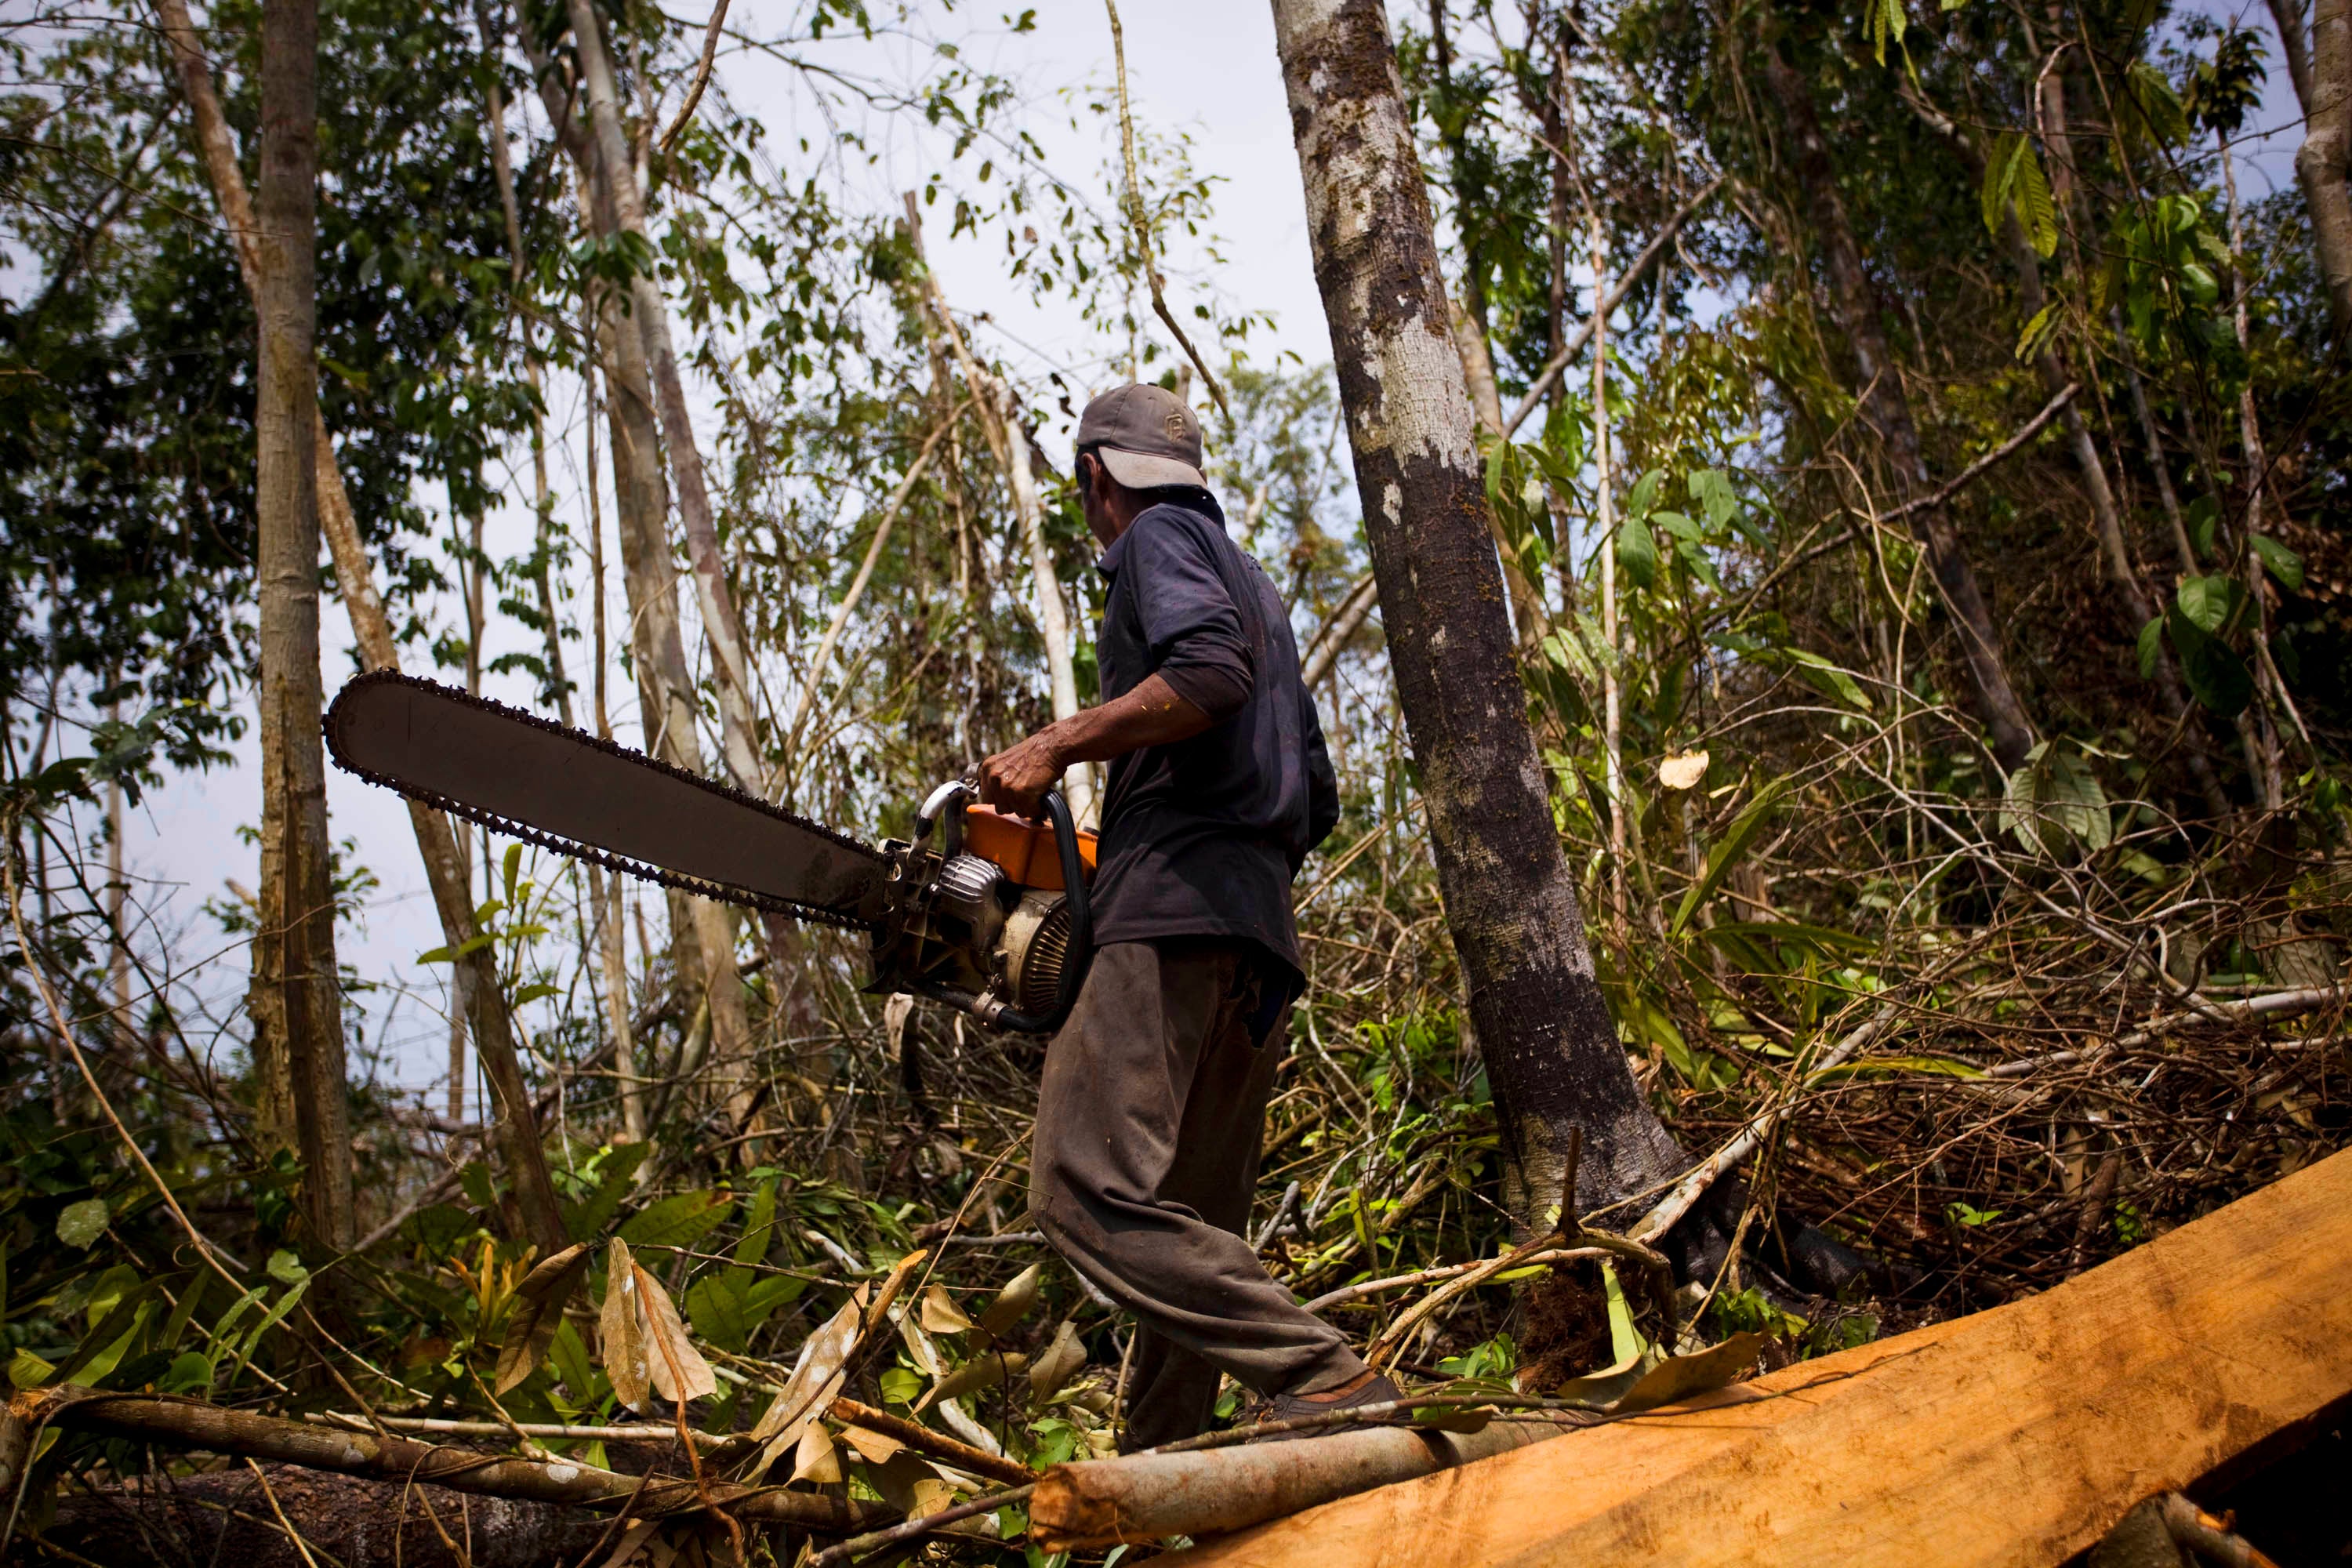 Deforestation accounts for around 11 per cent of all greenhouse gas emissions